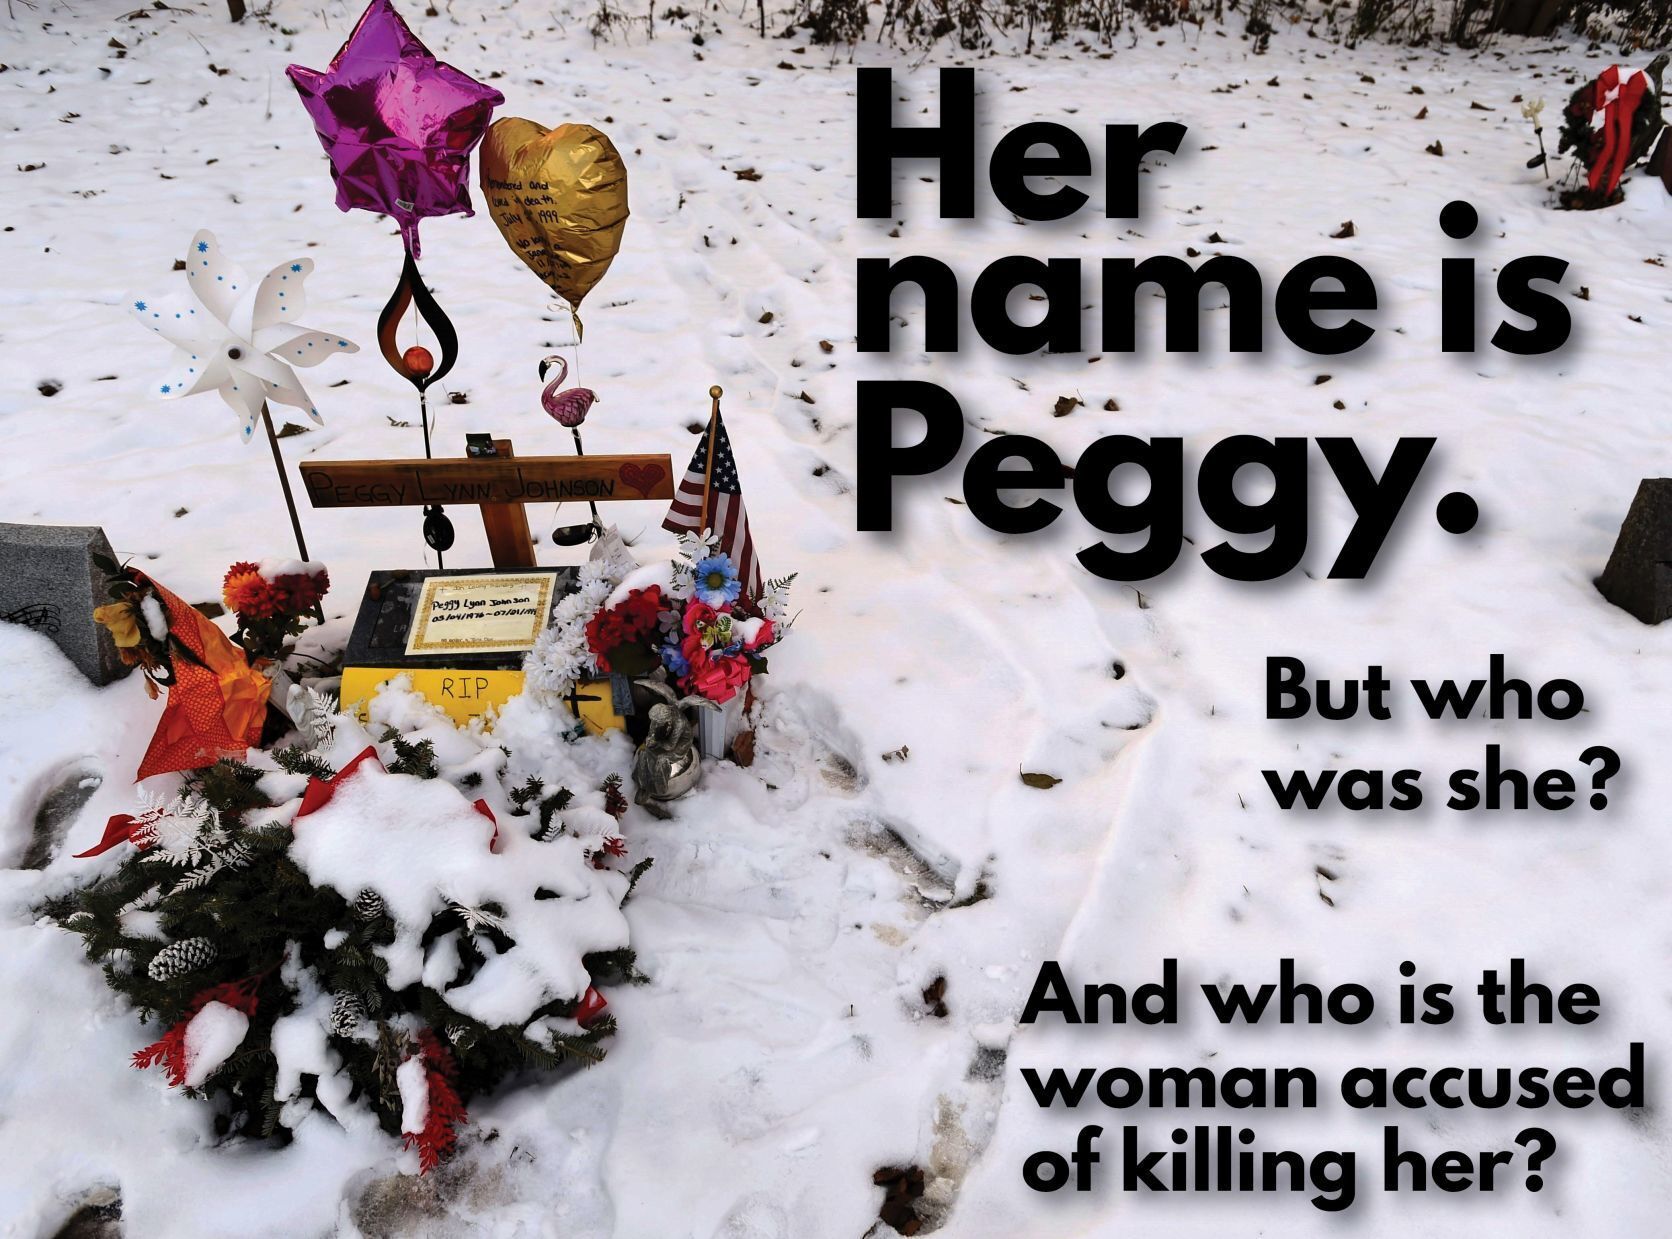 Who was Peggy Johnson? And why didnt anyone say she was missing for 20 years?